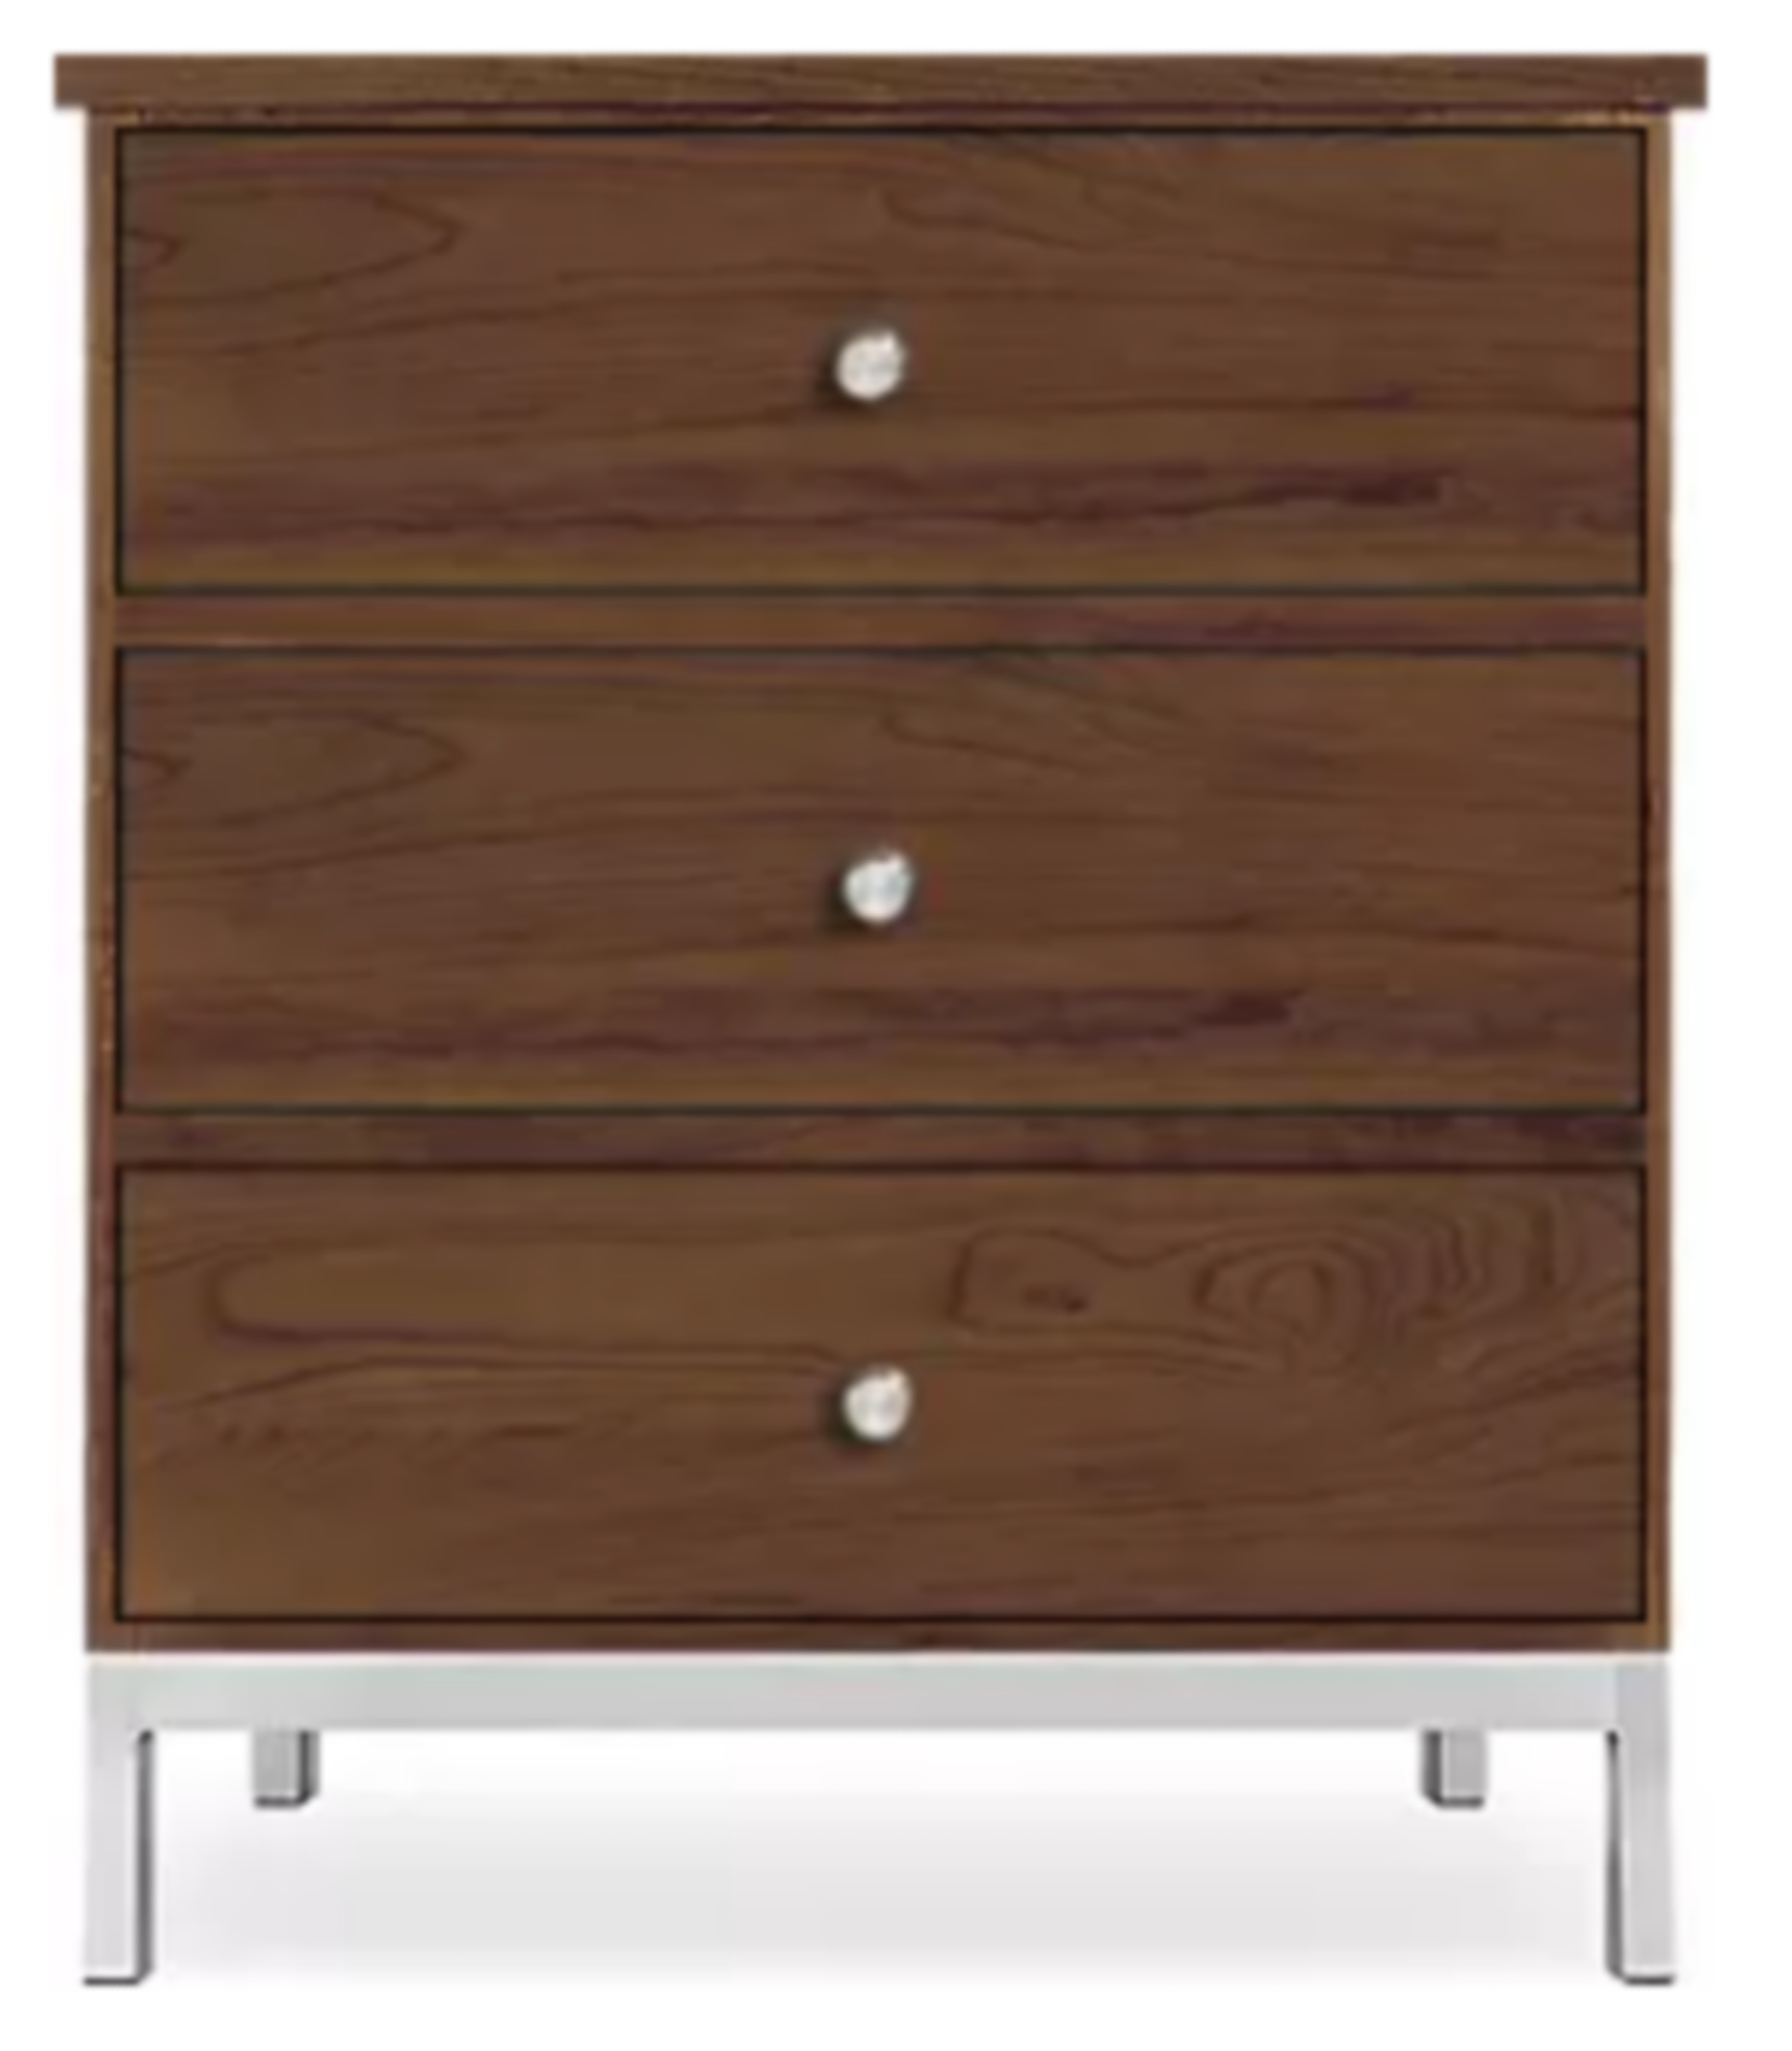 Linear 26w 16d 32h Cabinet in Walnut with Stainless Steel